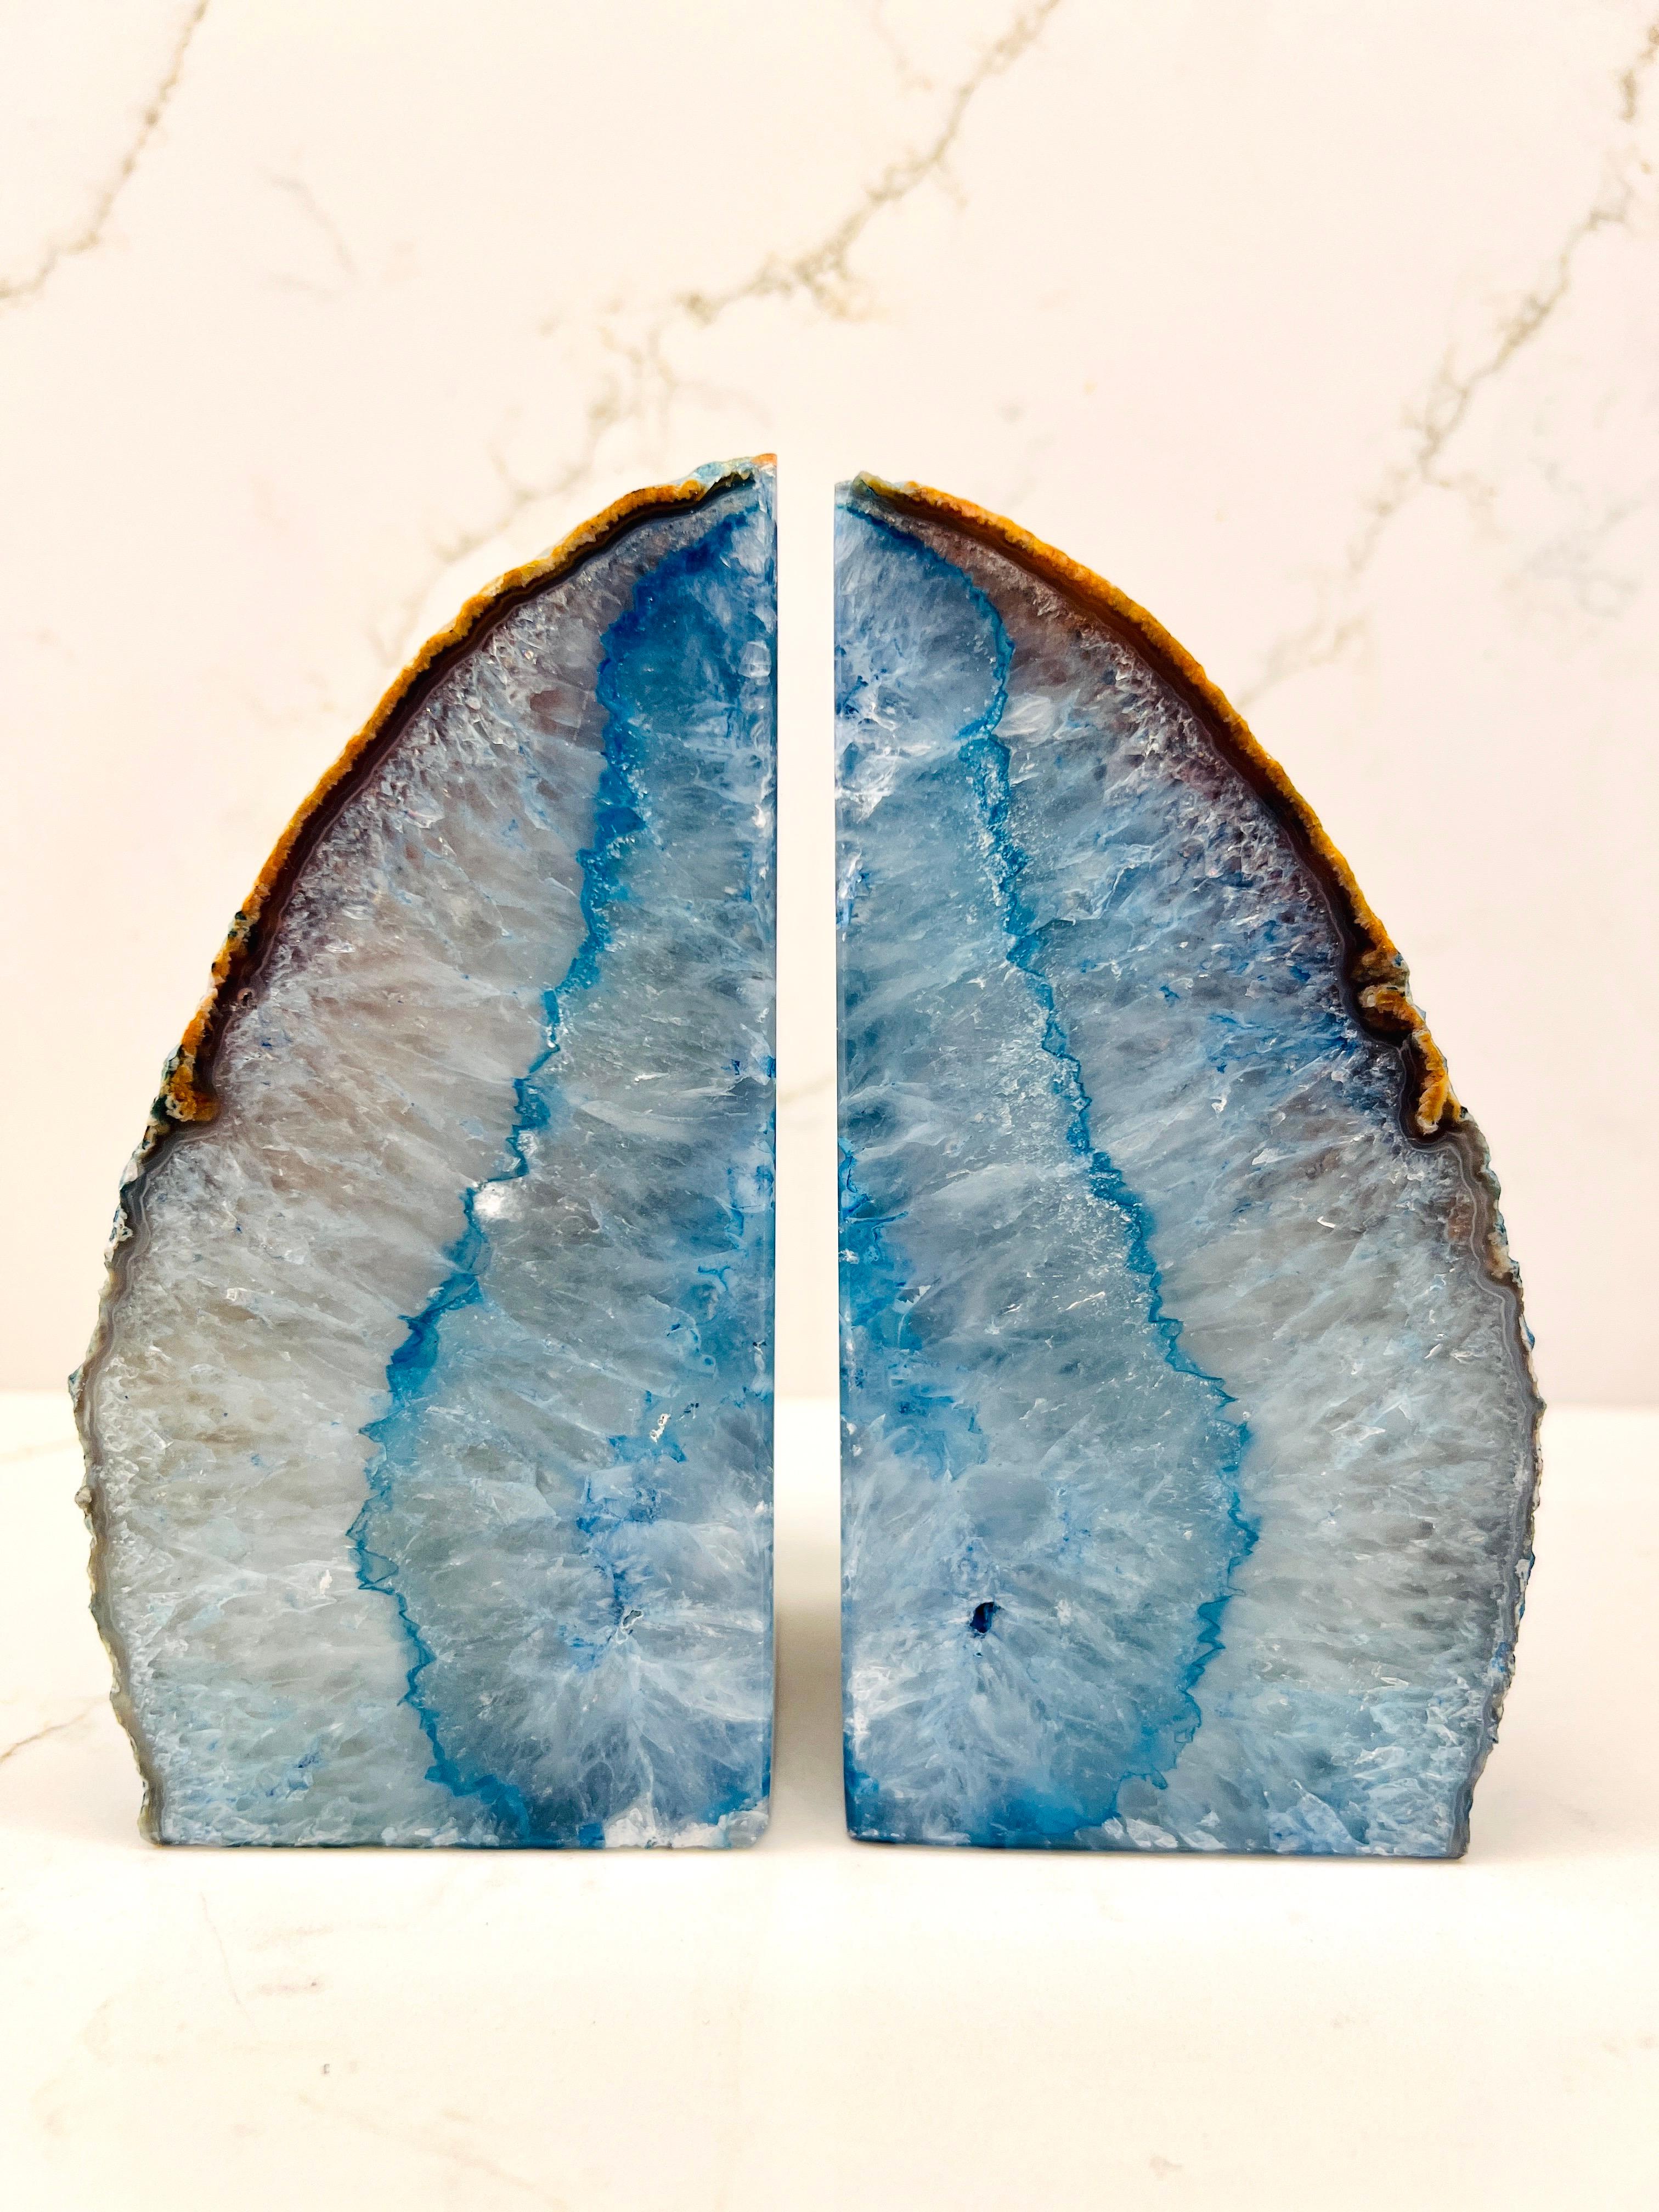 Pair of natural quartz crystal bookends with vibrant hues of blue. The hand carved specimens feature polished fronts with rough live edges. Made of crystallized minerals that take thousands of years to form, making each piece unique. Make great